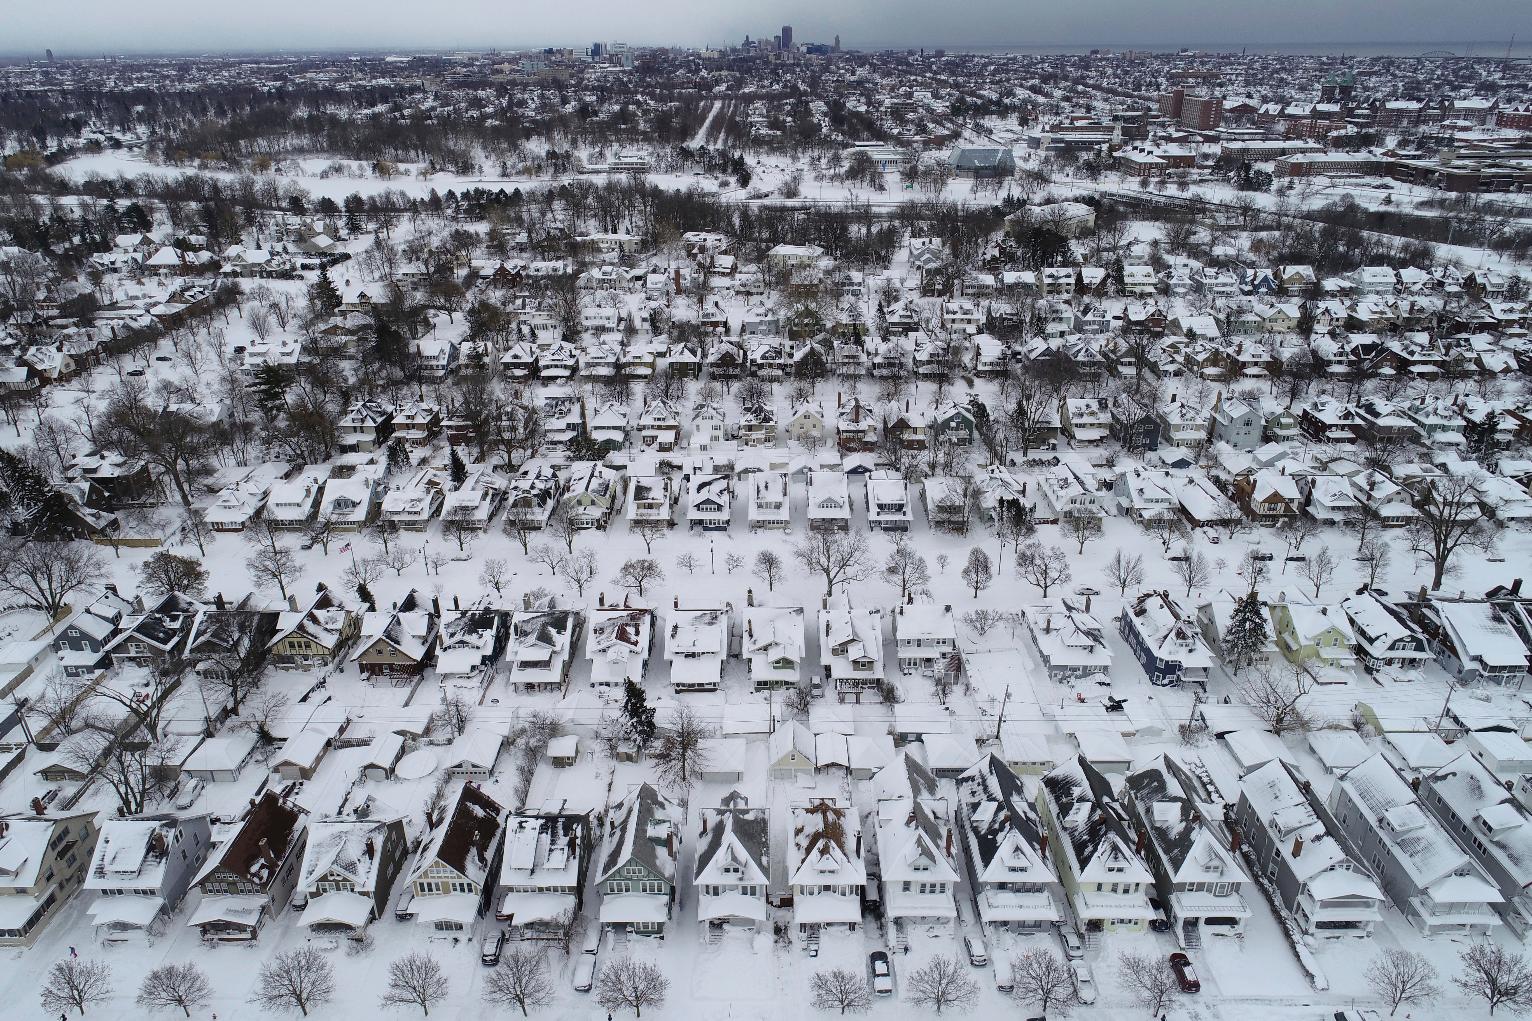 An aerial view of the 1901 Pan-American Exposition neighborhood in Buffalo, N.Y., which remains coated in a blanket of snow after an historic blizzard, Tuesday, 27 December 2022. State and military police were sent Tuesday to keep people off Buffalo’s snow-choked roads, and officials kept counting fatalities three days after western New York’s deadliest storm in at least two generations. Photo: Derek Gee / The Buffalo News / AP